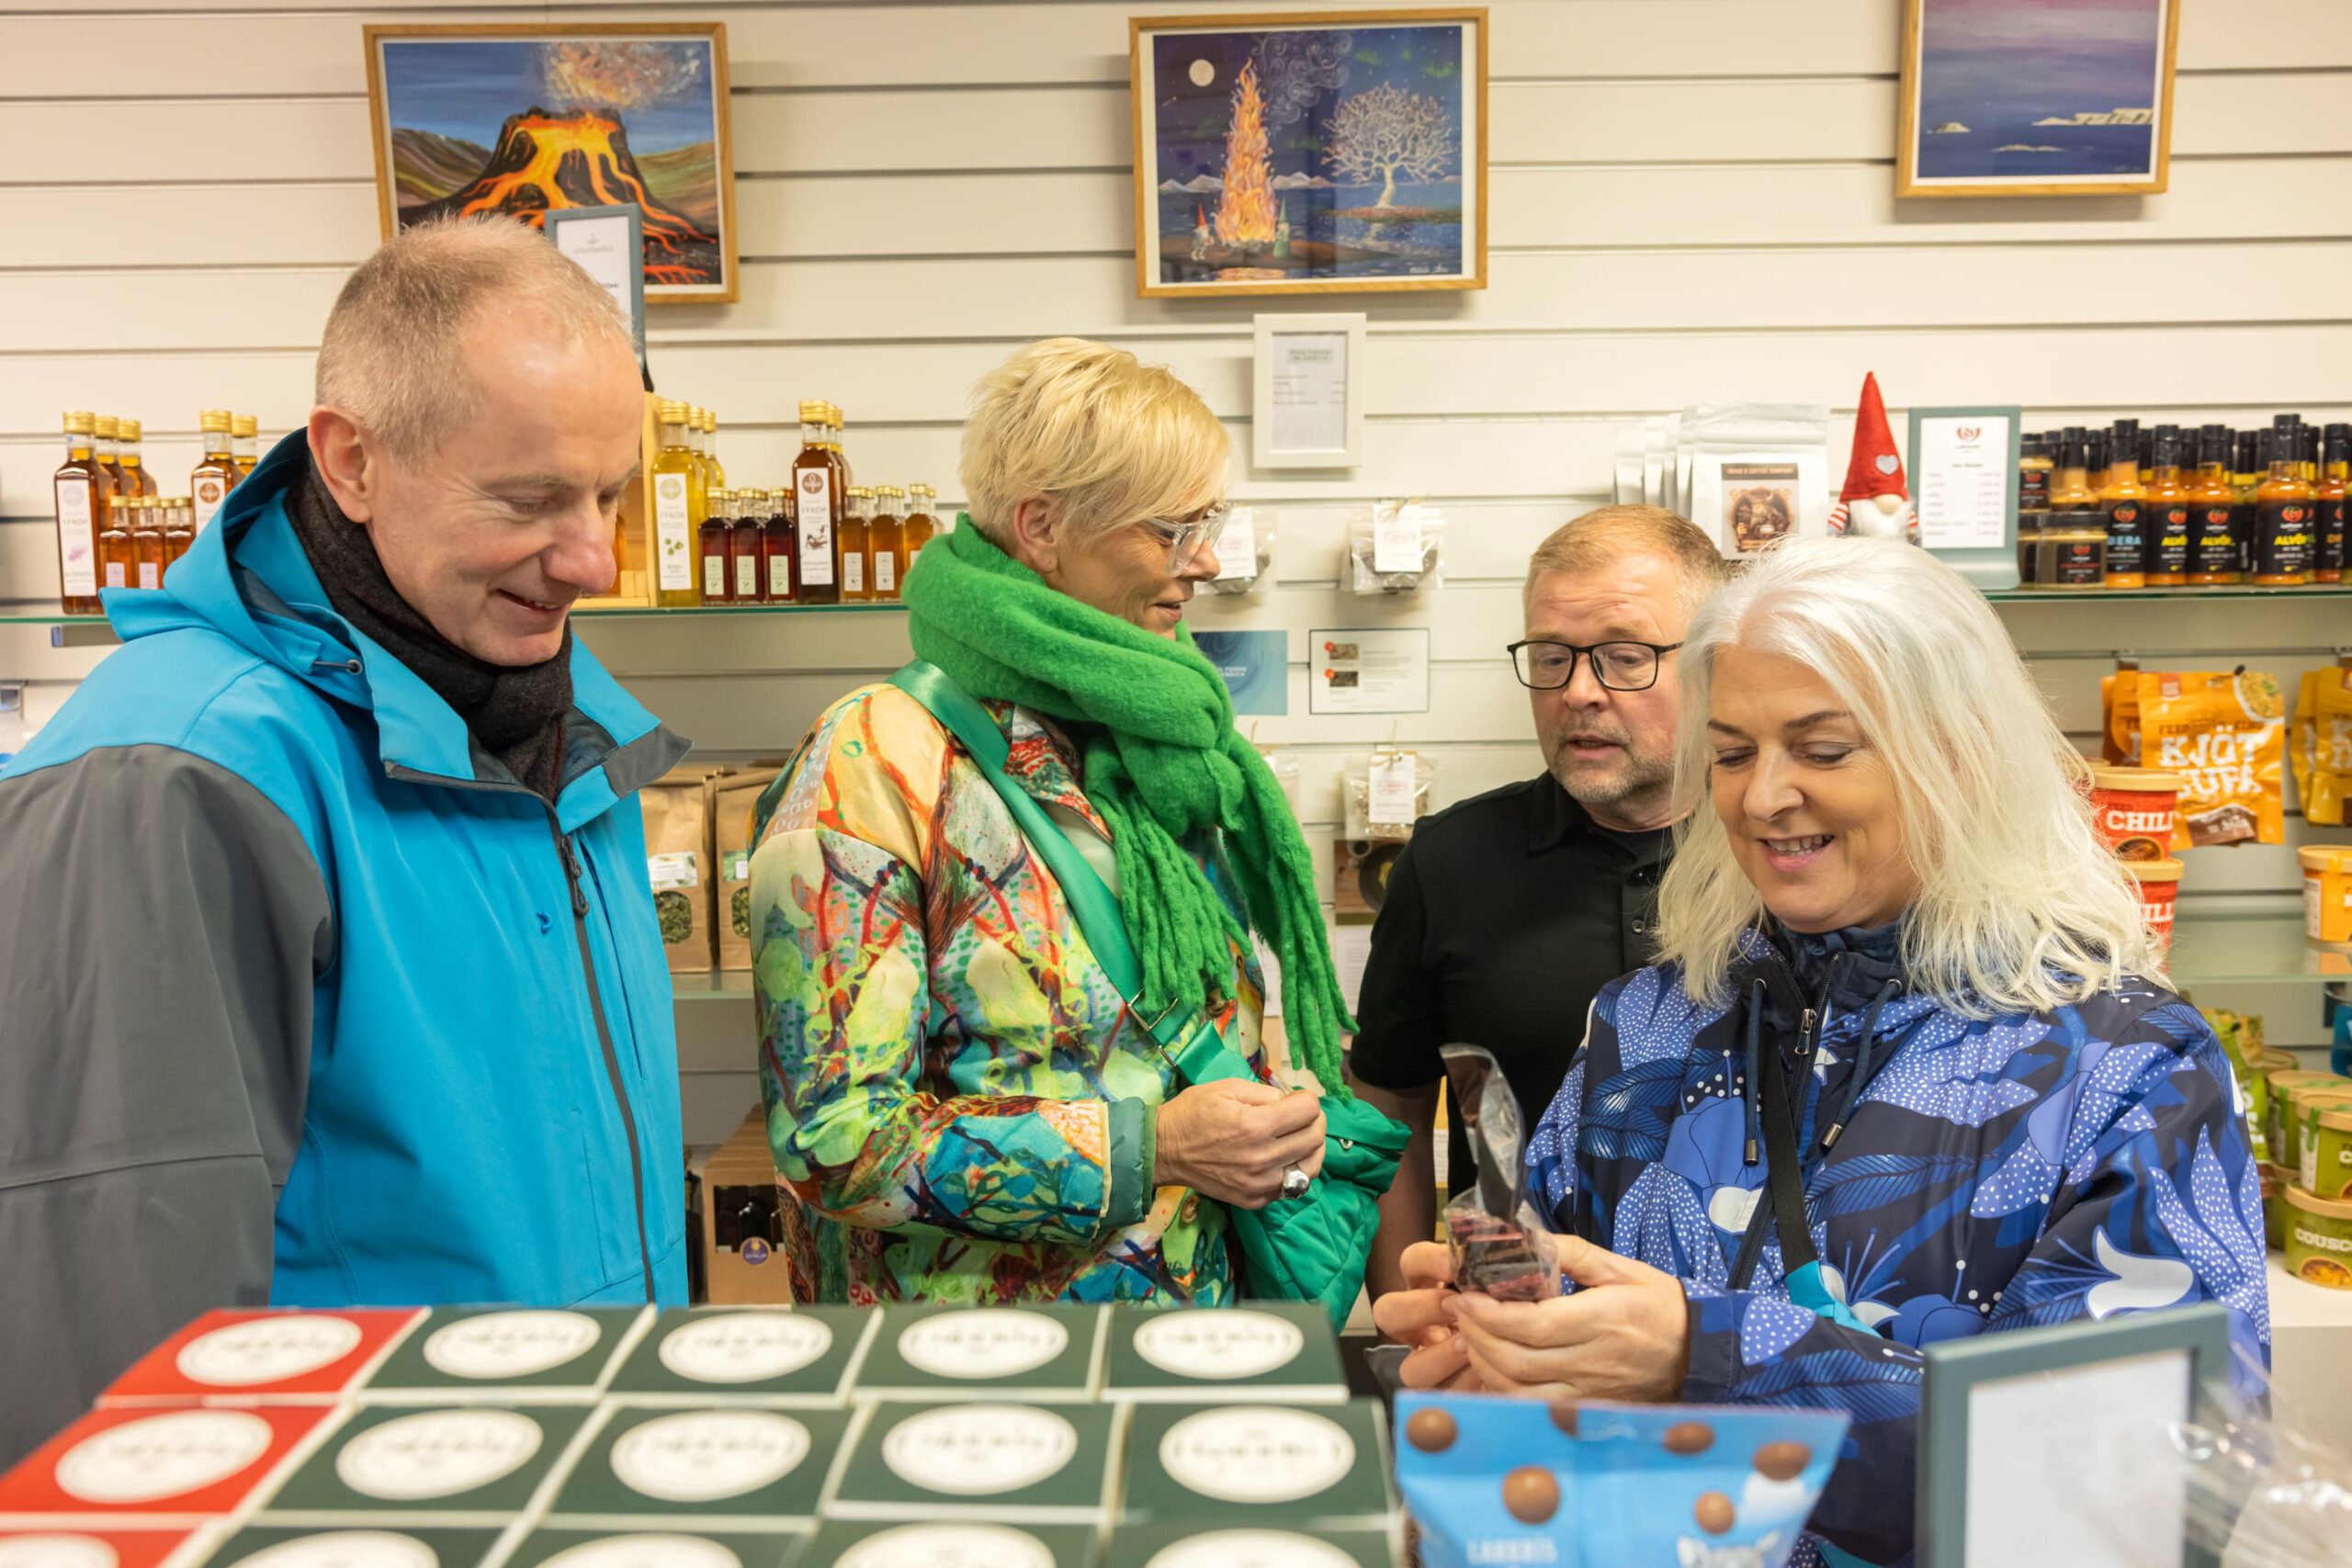 A tour Group browsing through a local speciality store in downtown Reykjavik.